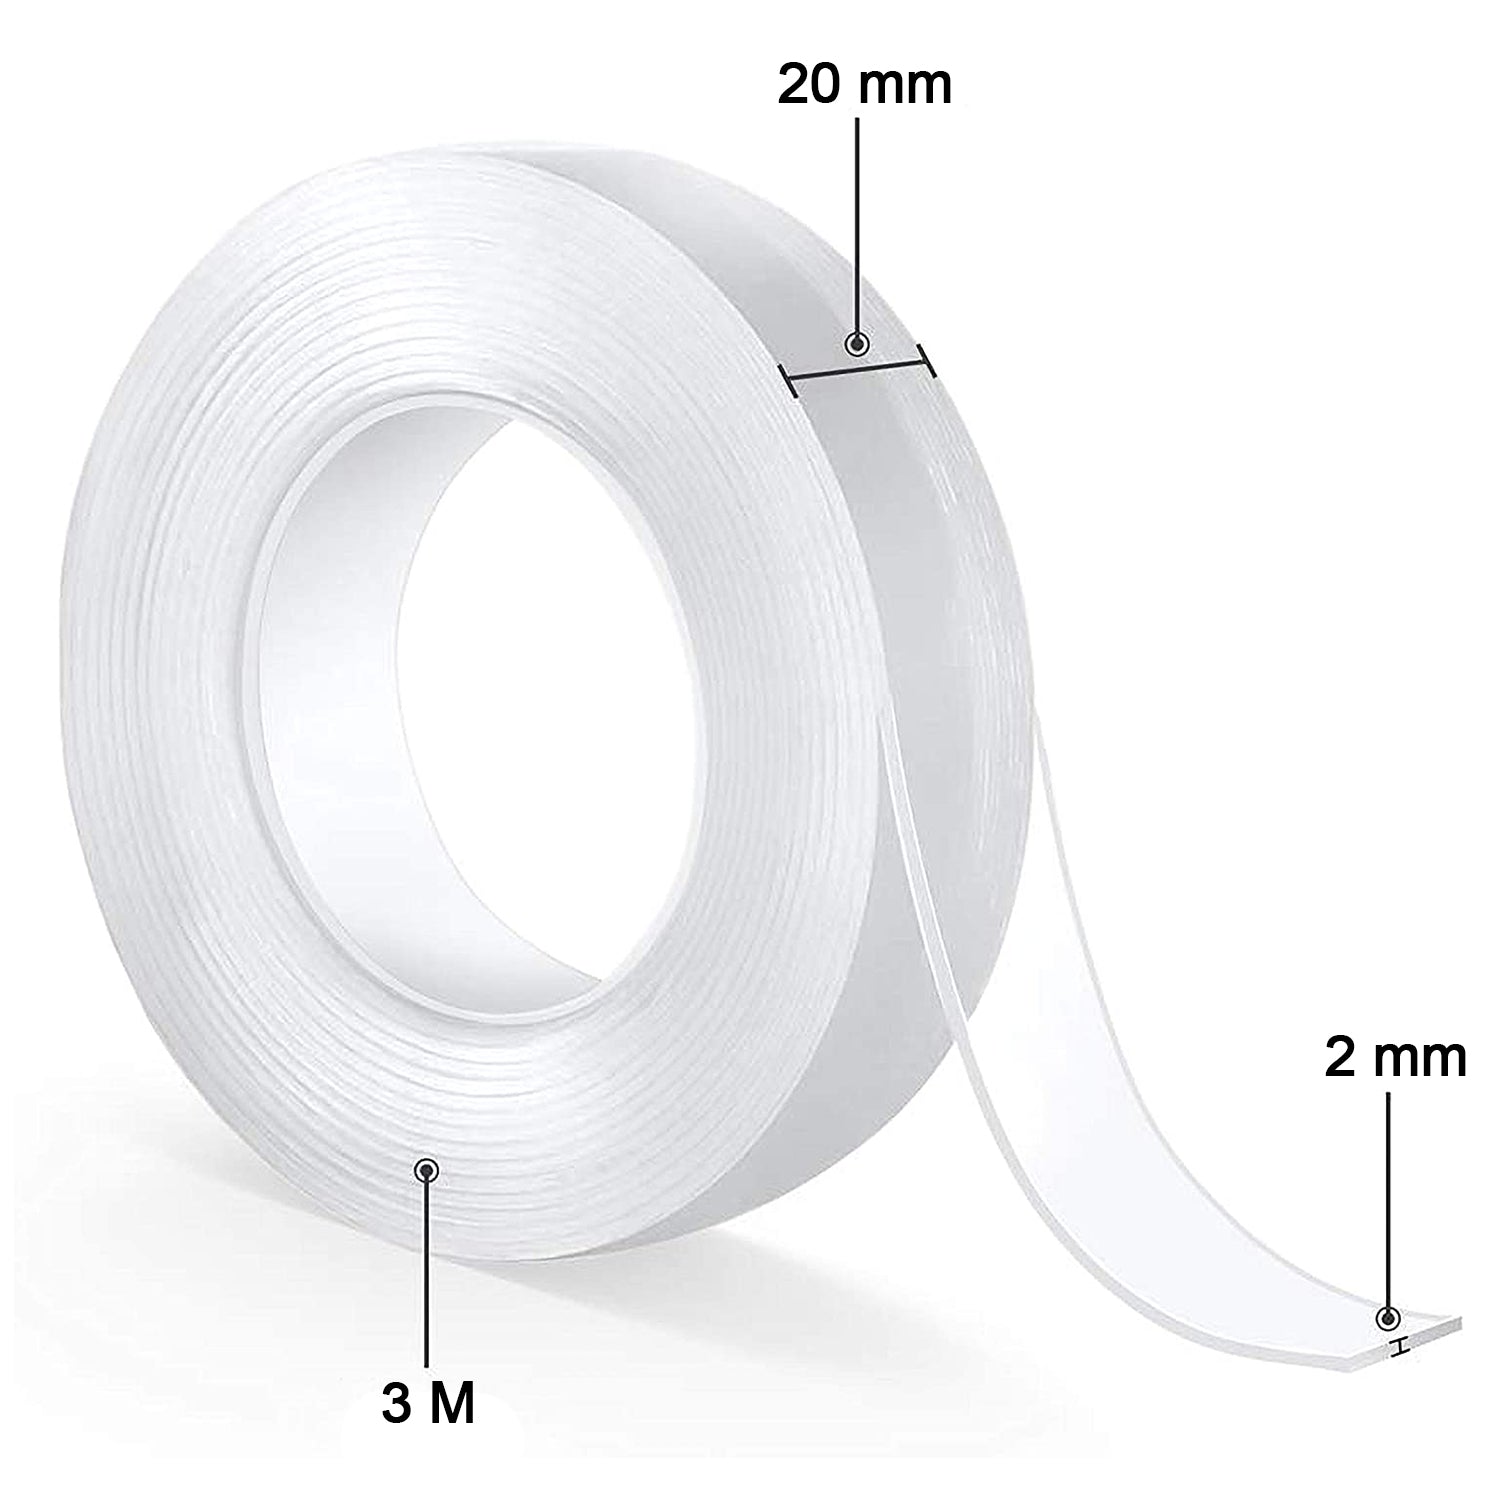 0882A Double Sided Nano Adhesive Tape, 3 meter Size (20mm Width X 2mm Thickness) freeshipping - DeoDap